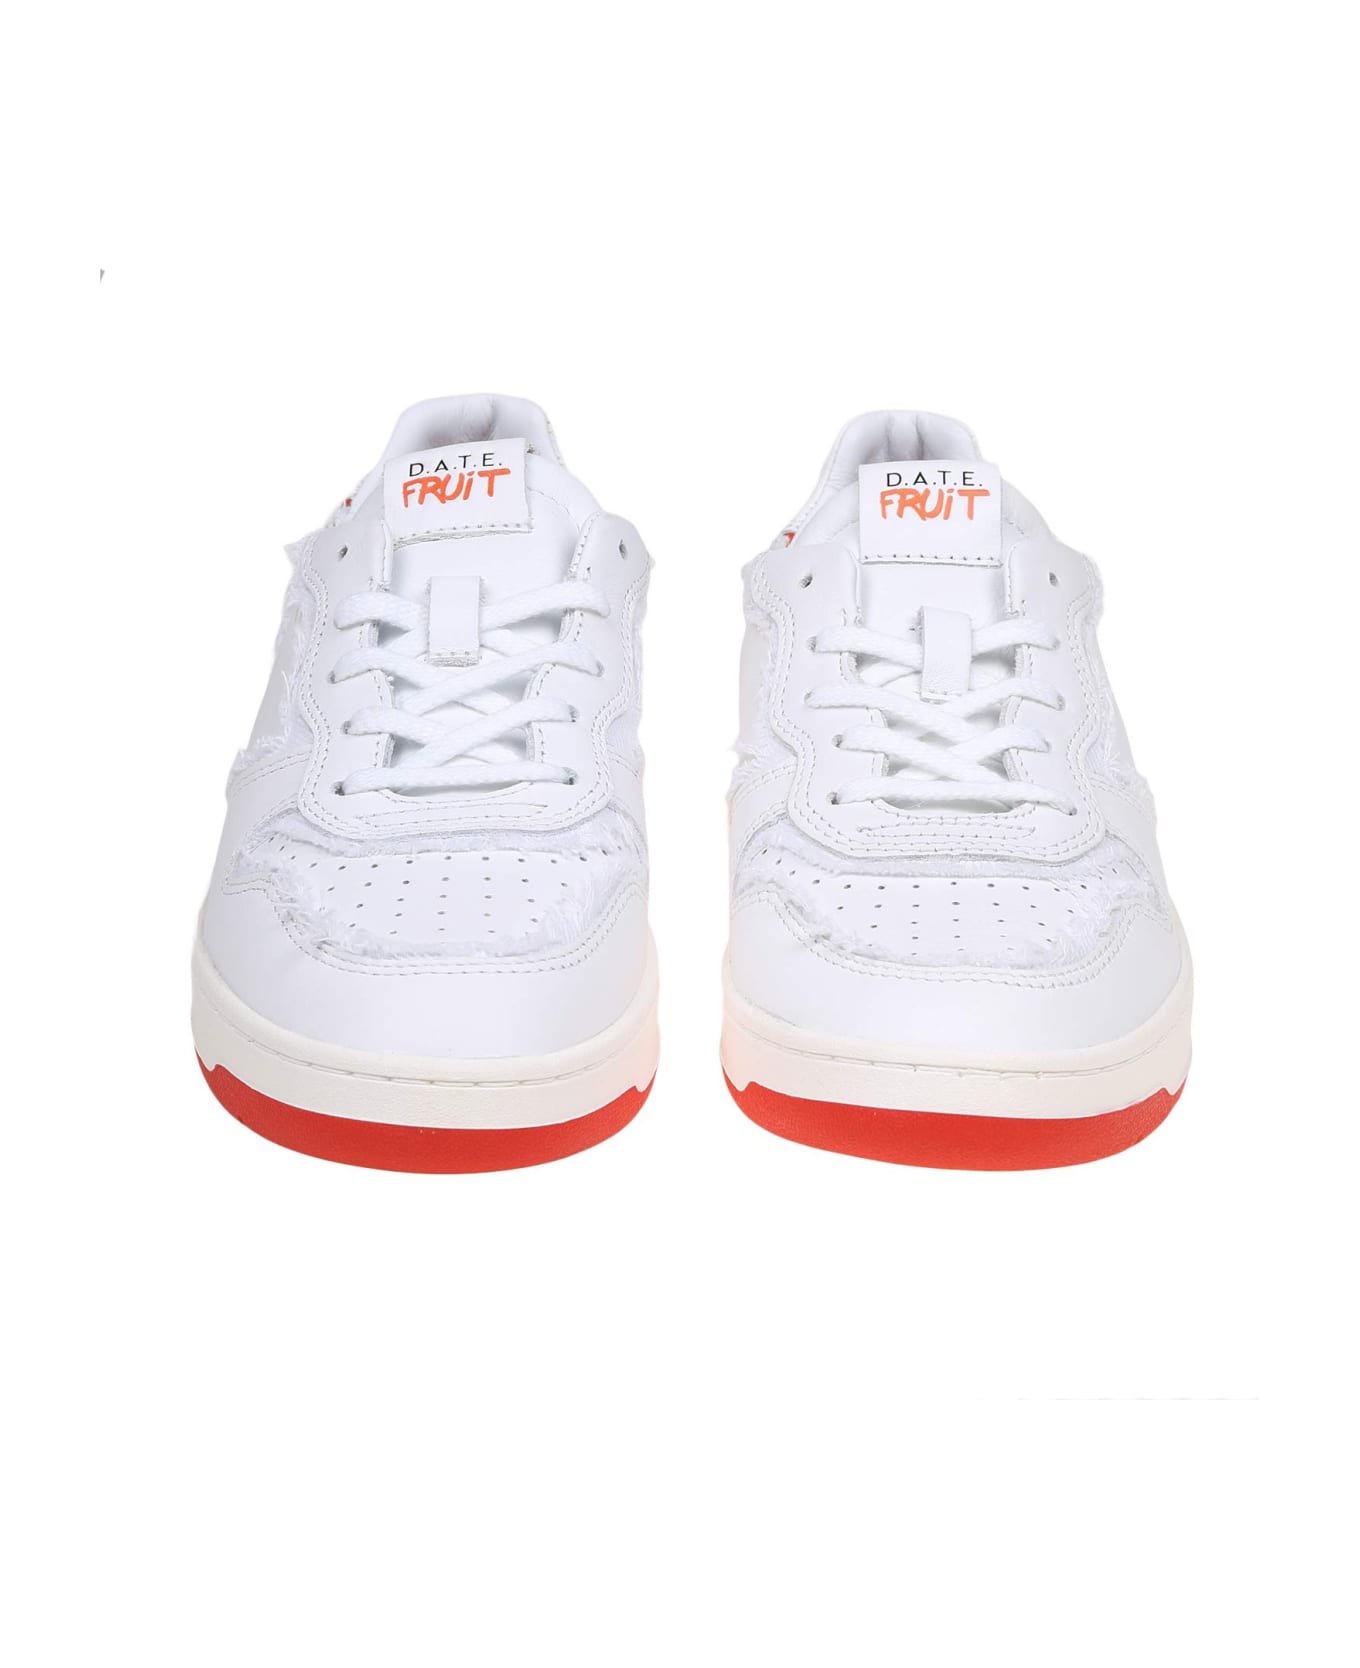 D.A.T.E. Court Sneakers In White Leather - CHERRY スニーカー